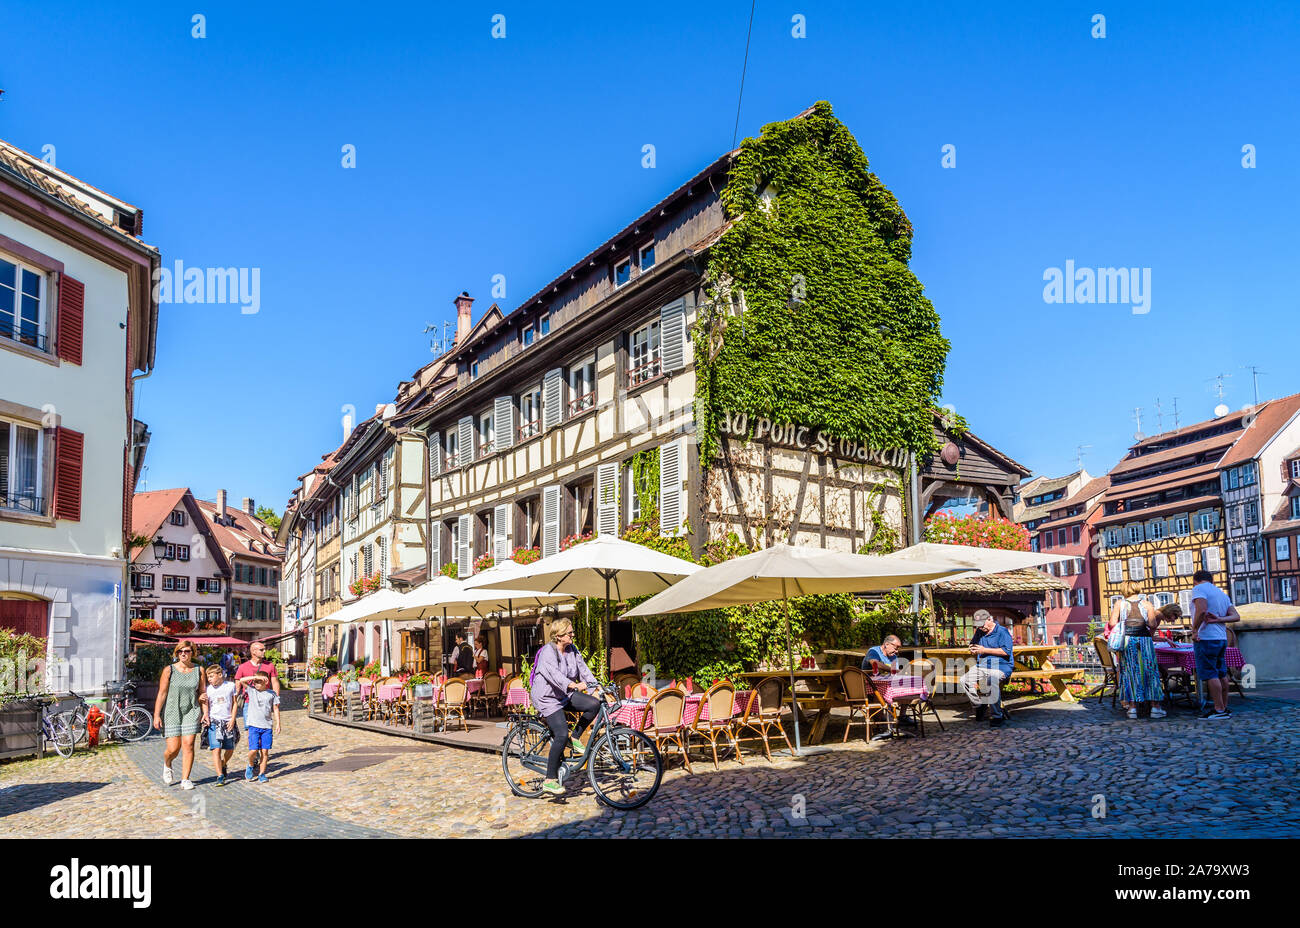 Tourists strolling in front of the restaurant 'Au Pont Saint-Martin' set in a half-timbered house in the Petite France quarter in Strasbourg, France. Stock Photo